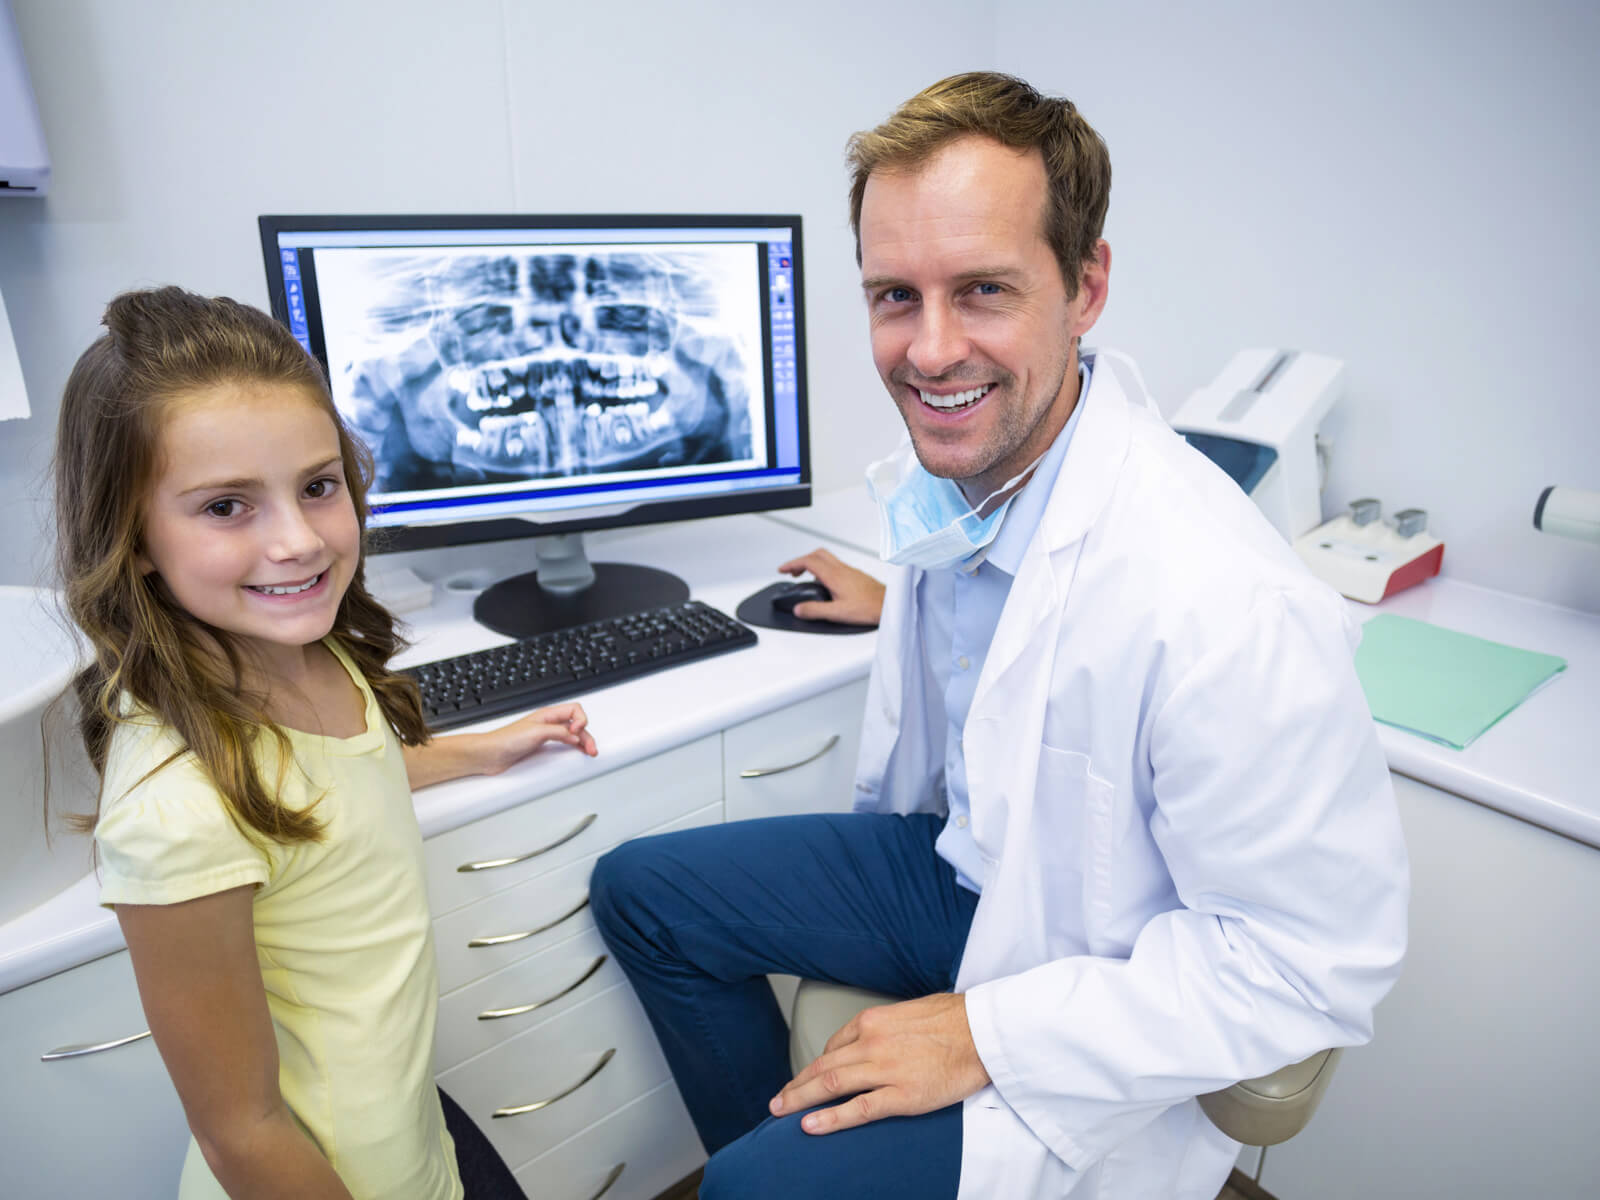 Dental X-rays For Children: Safety And Necessity